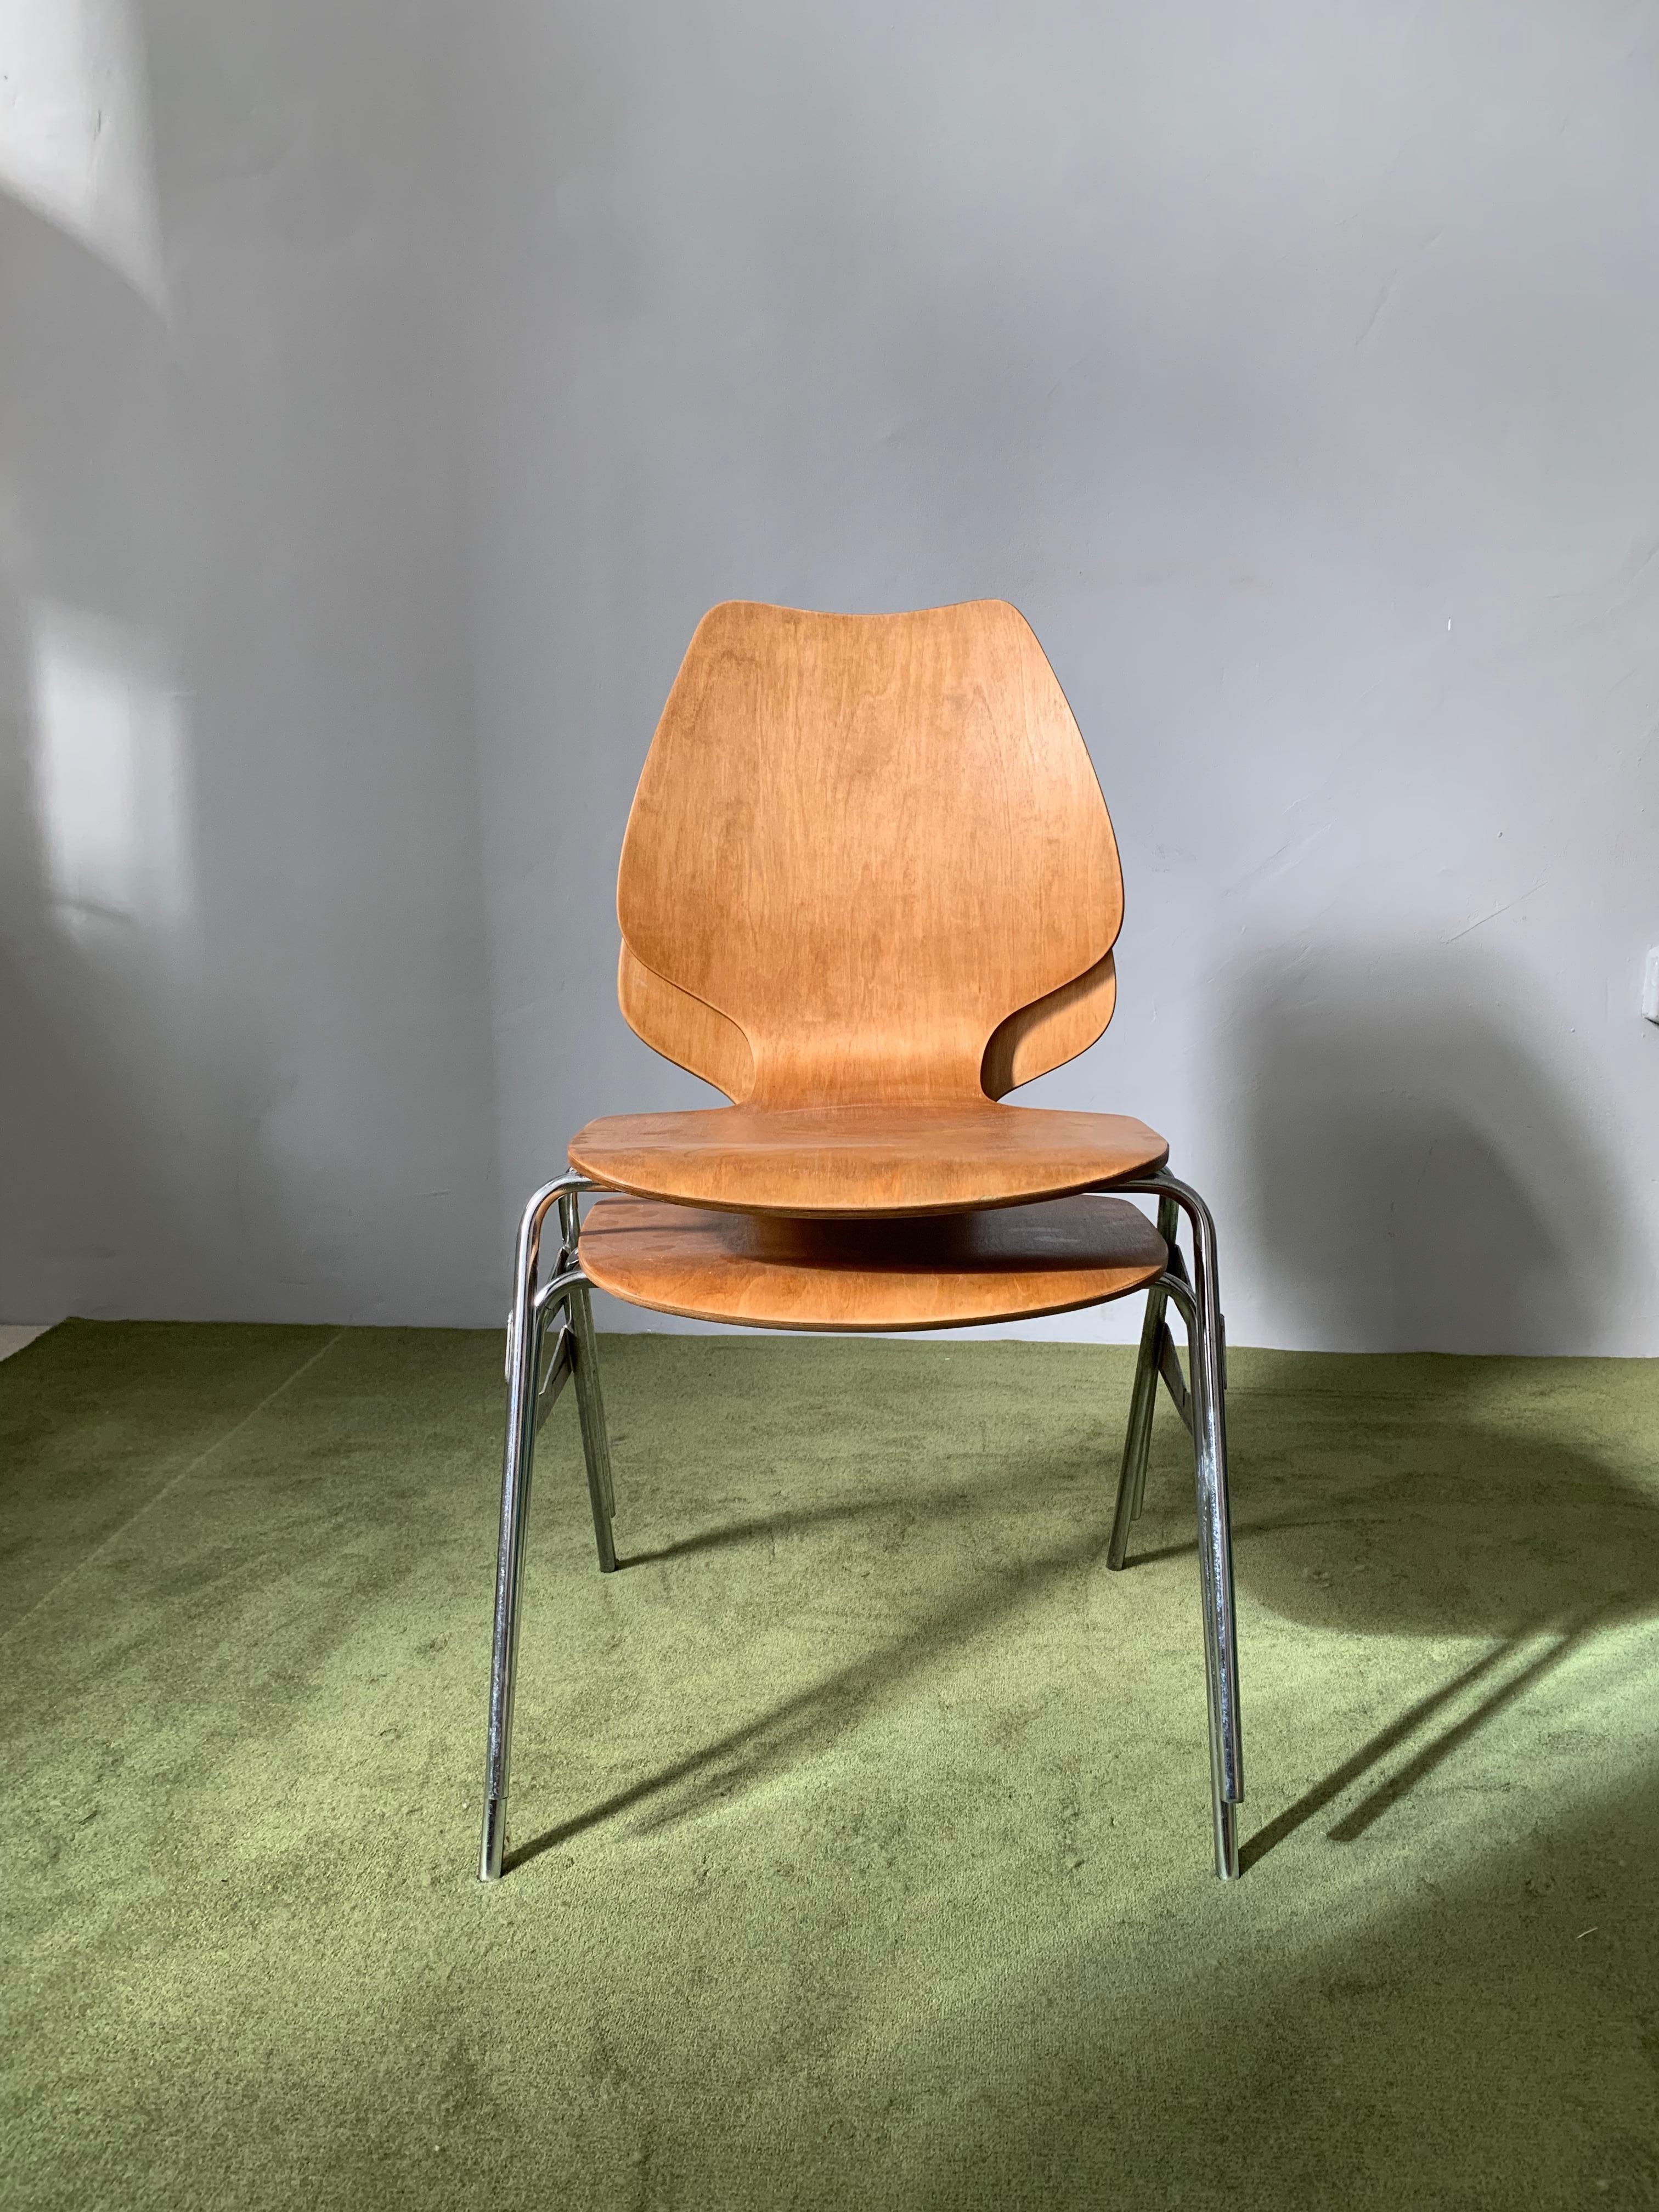 Vintage Swiss Industrial  Design Plywood Stacking Chair by Horgen Glarus 1960's For Sale 10